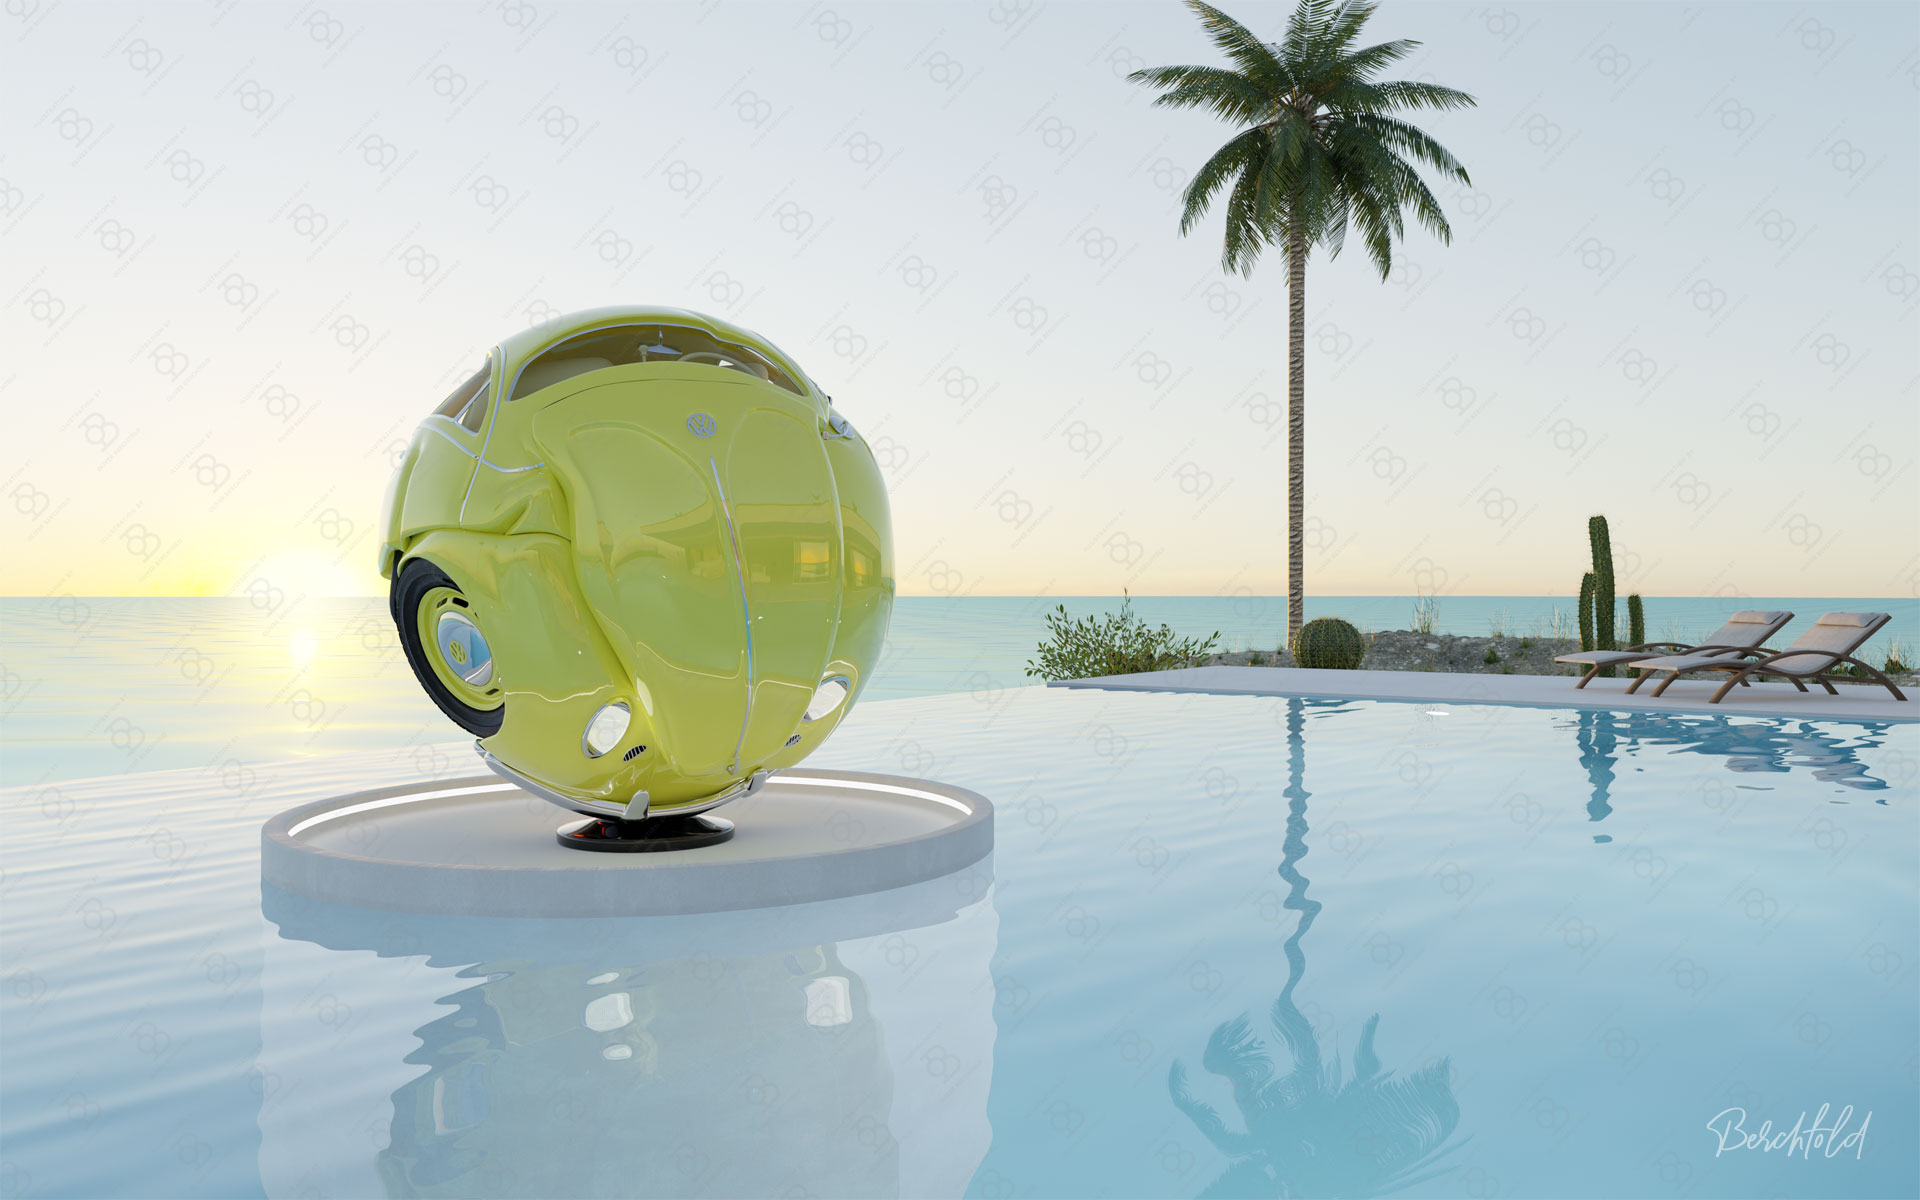 Beetle Sphere Pool Scene -Cam 2 Made with Blender 3.4 (Renderer Cycles) © Oliver Berchtold